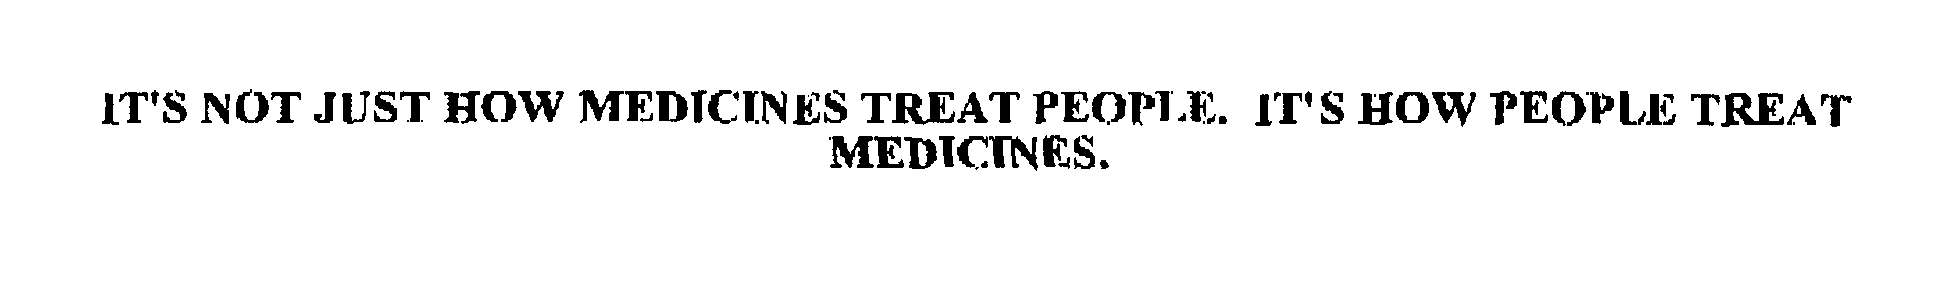  IT'S NOT JUST HOW MEDICINES TREAT PEOPLE. IT'S HOW PEOPLE TREAT MEDICINES.